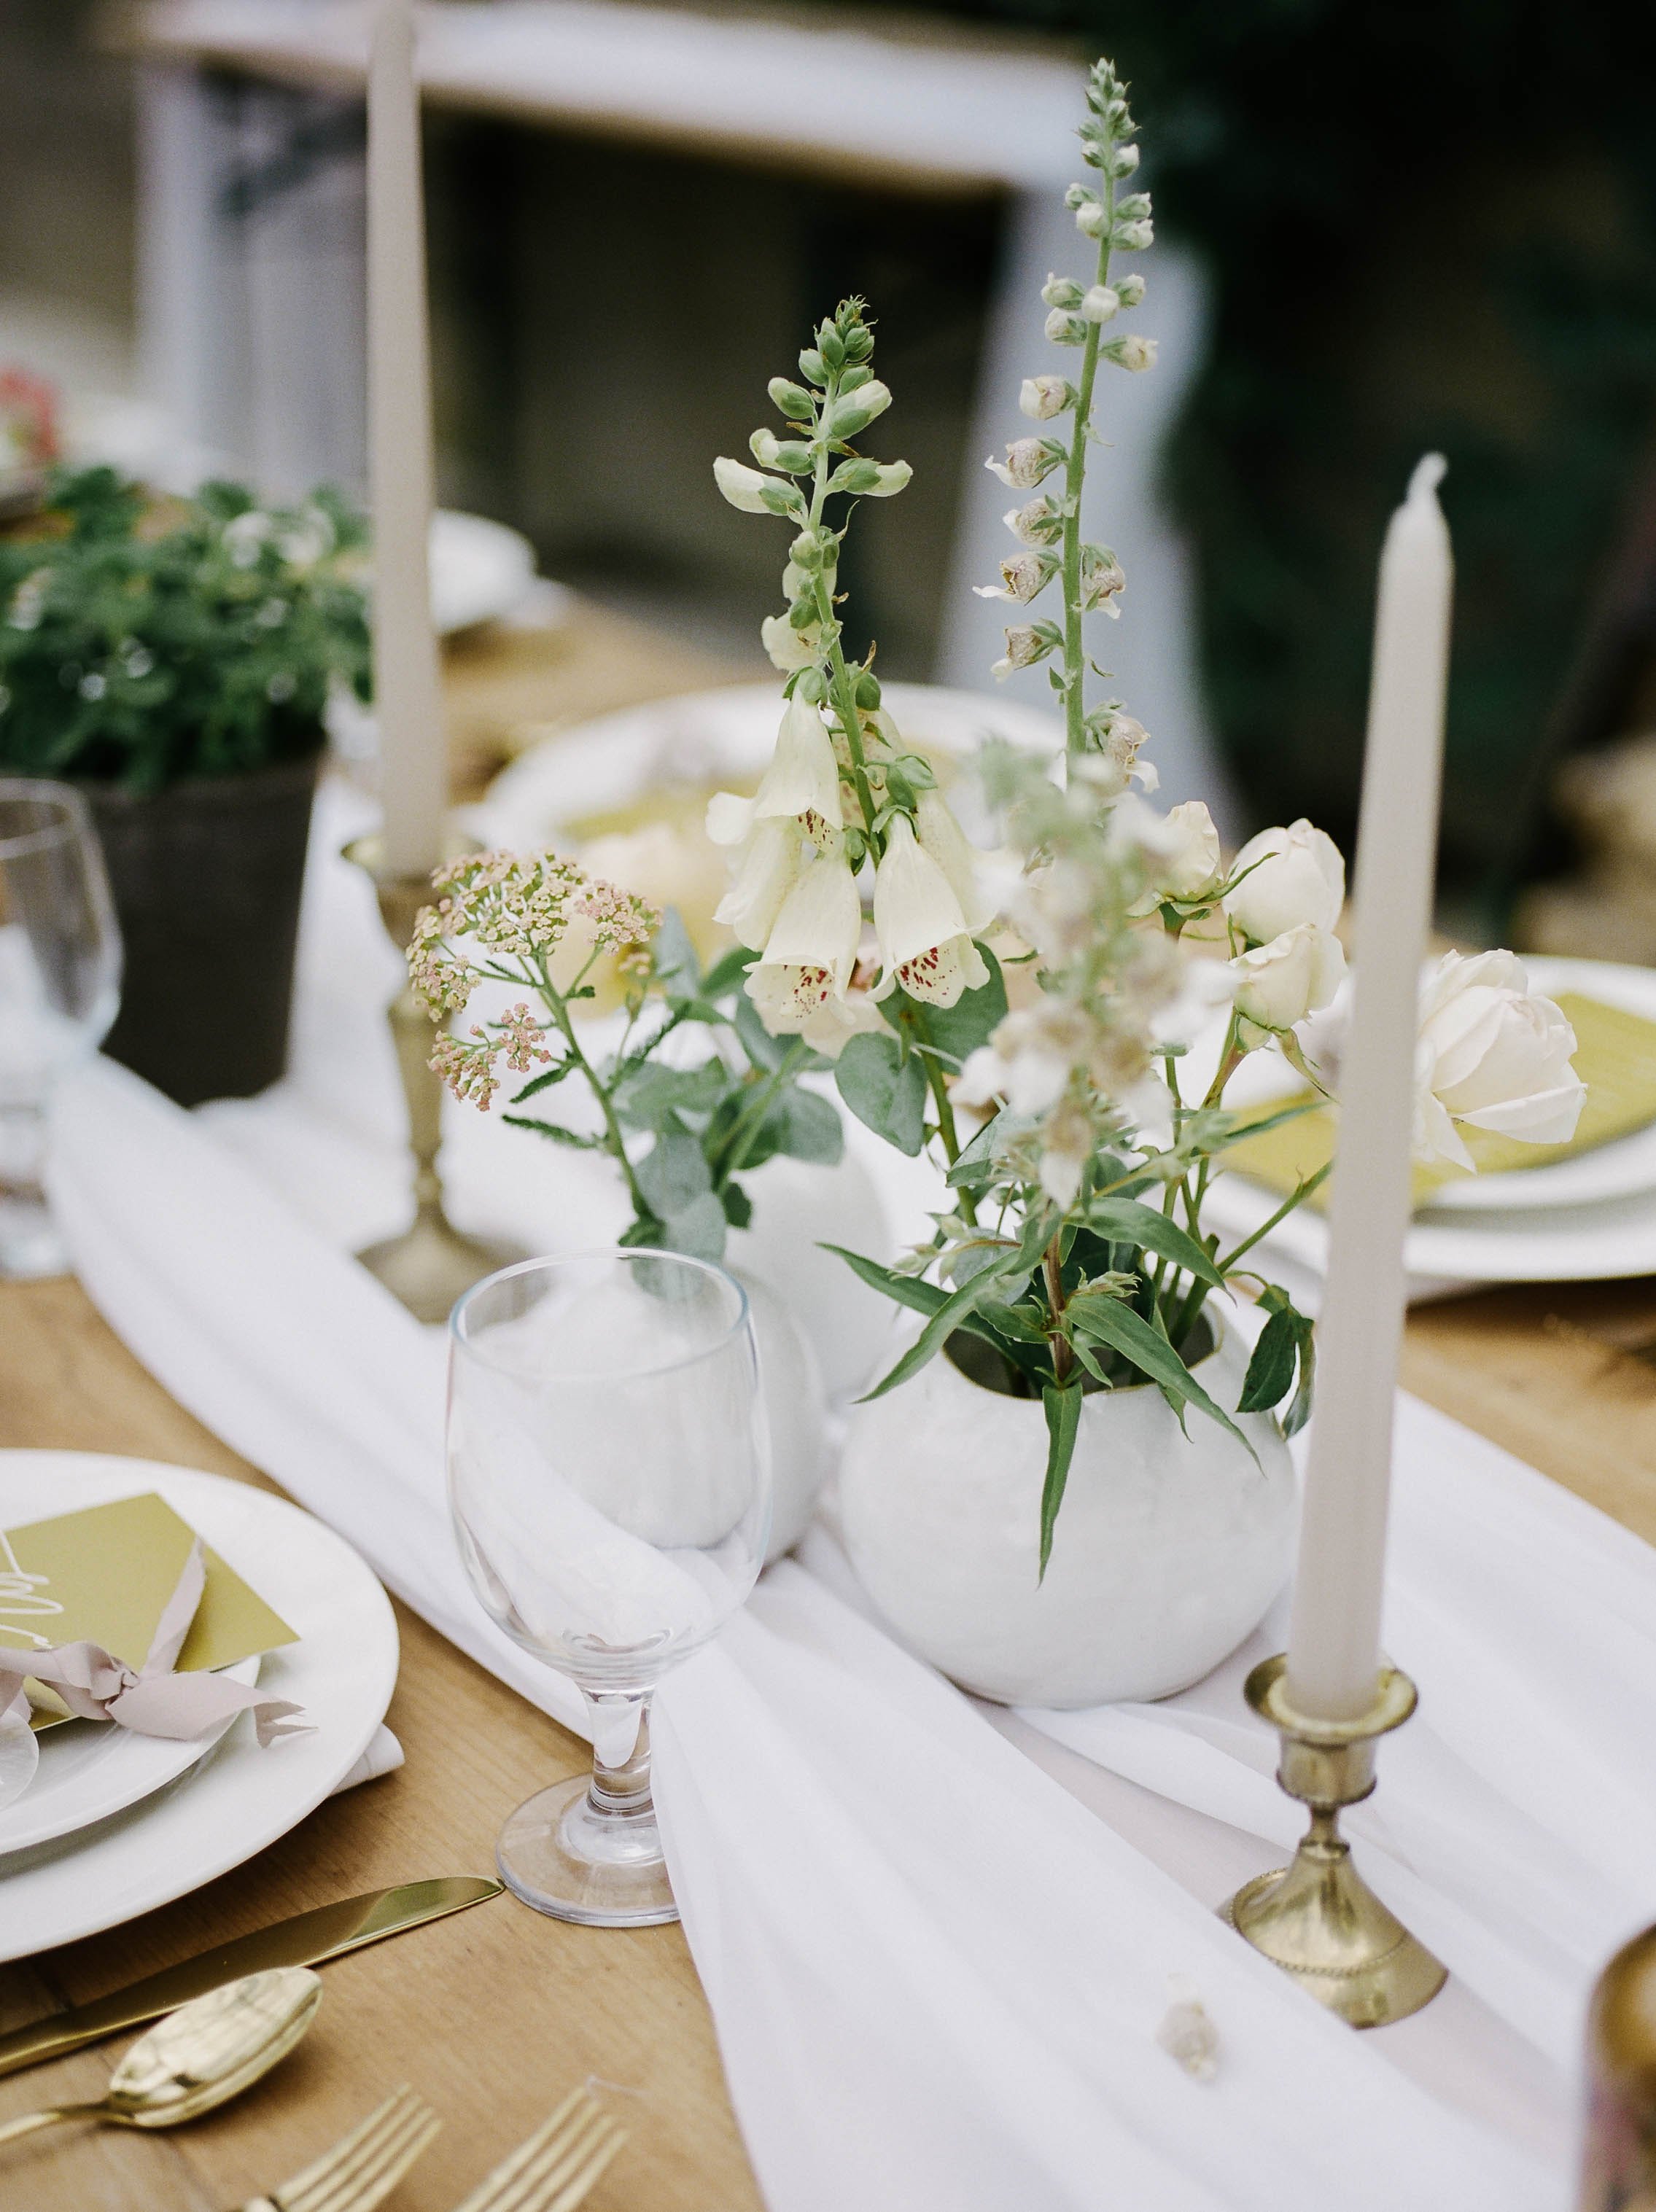 anothertablescape.jpg